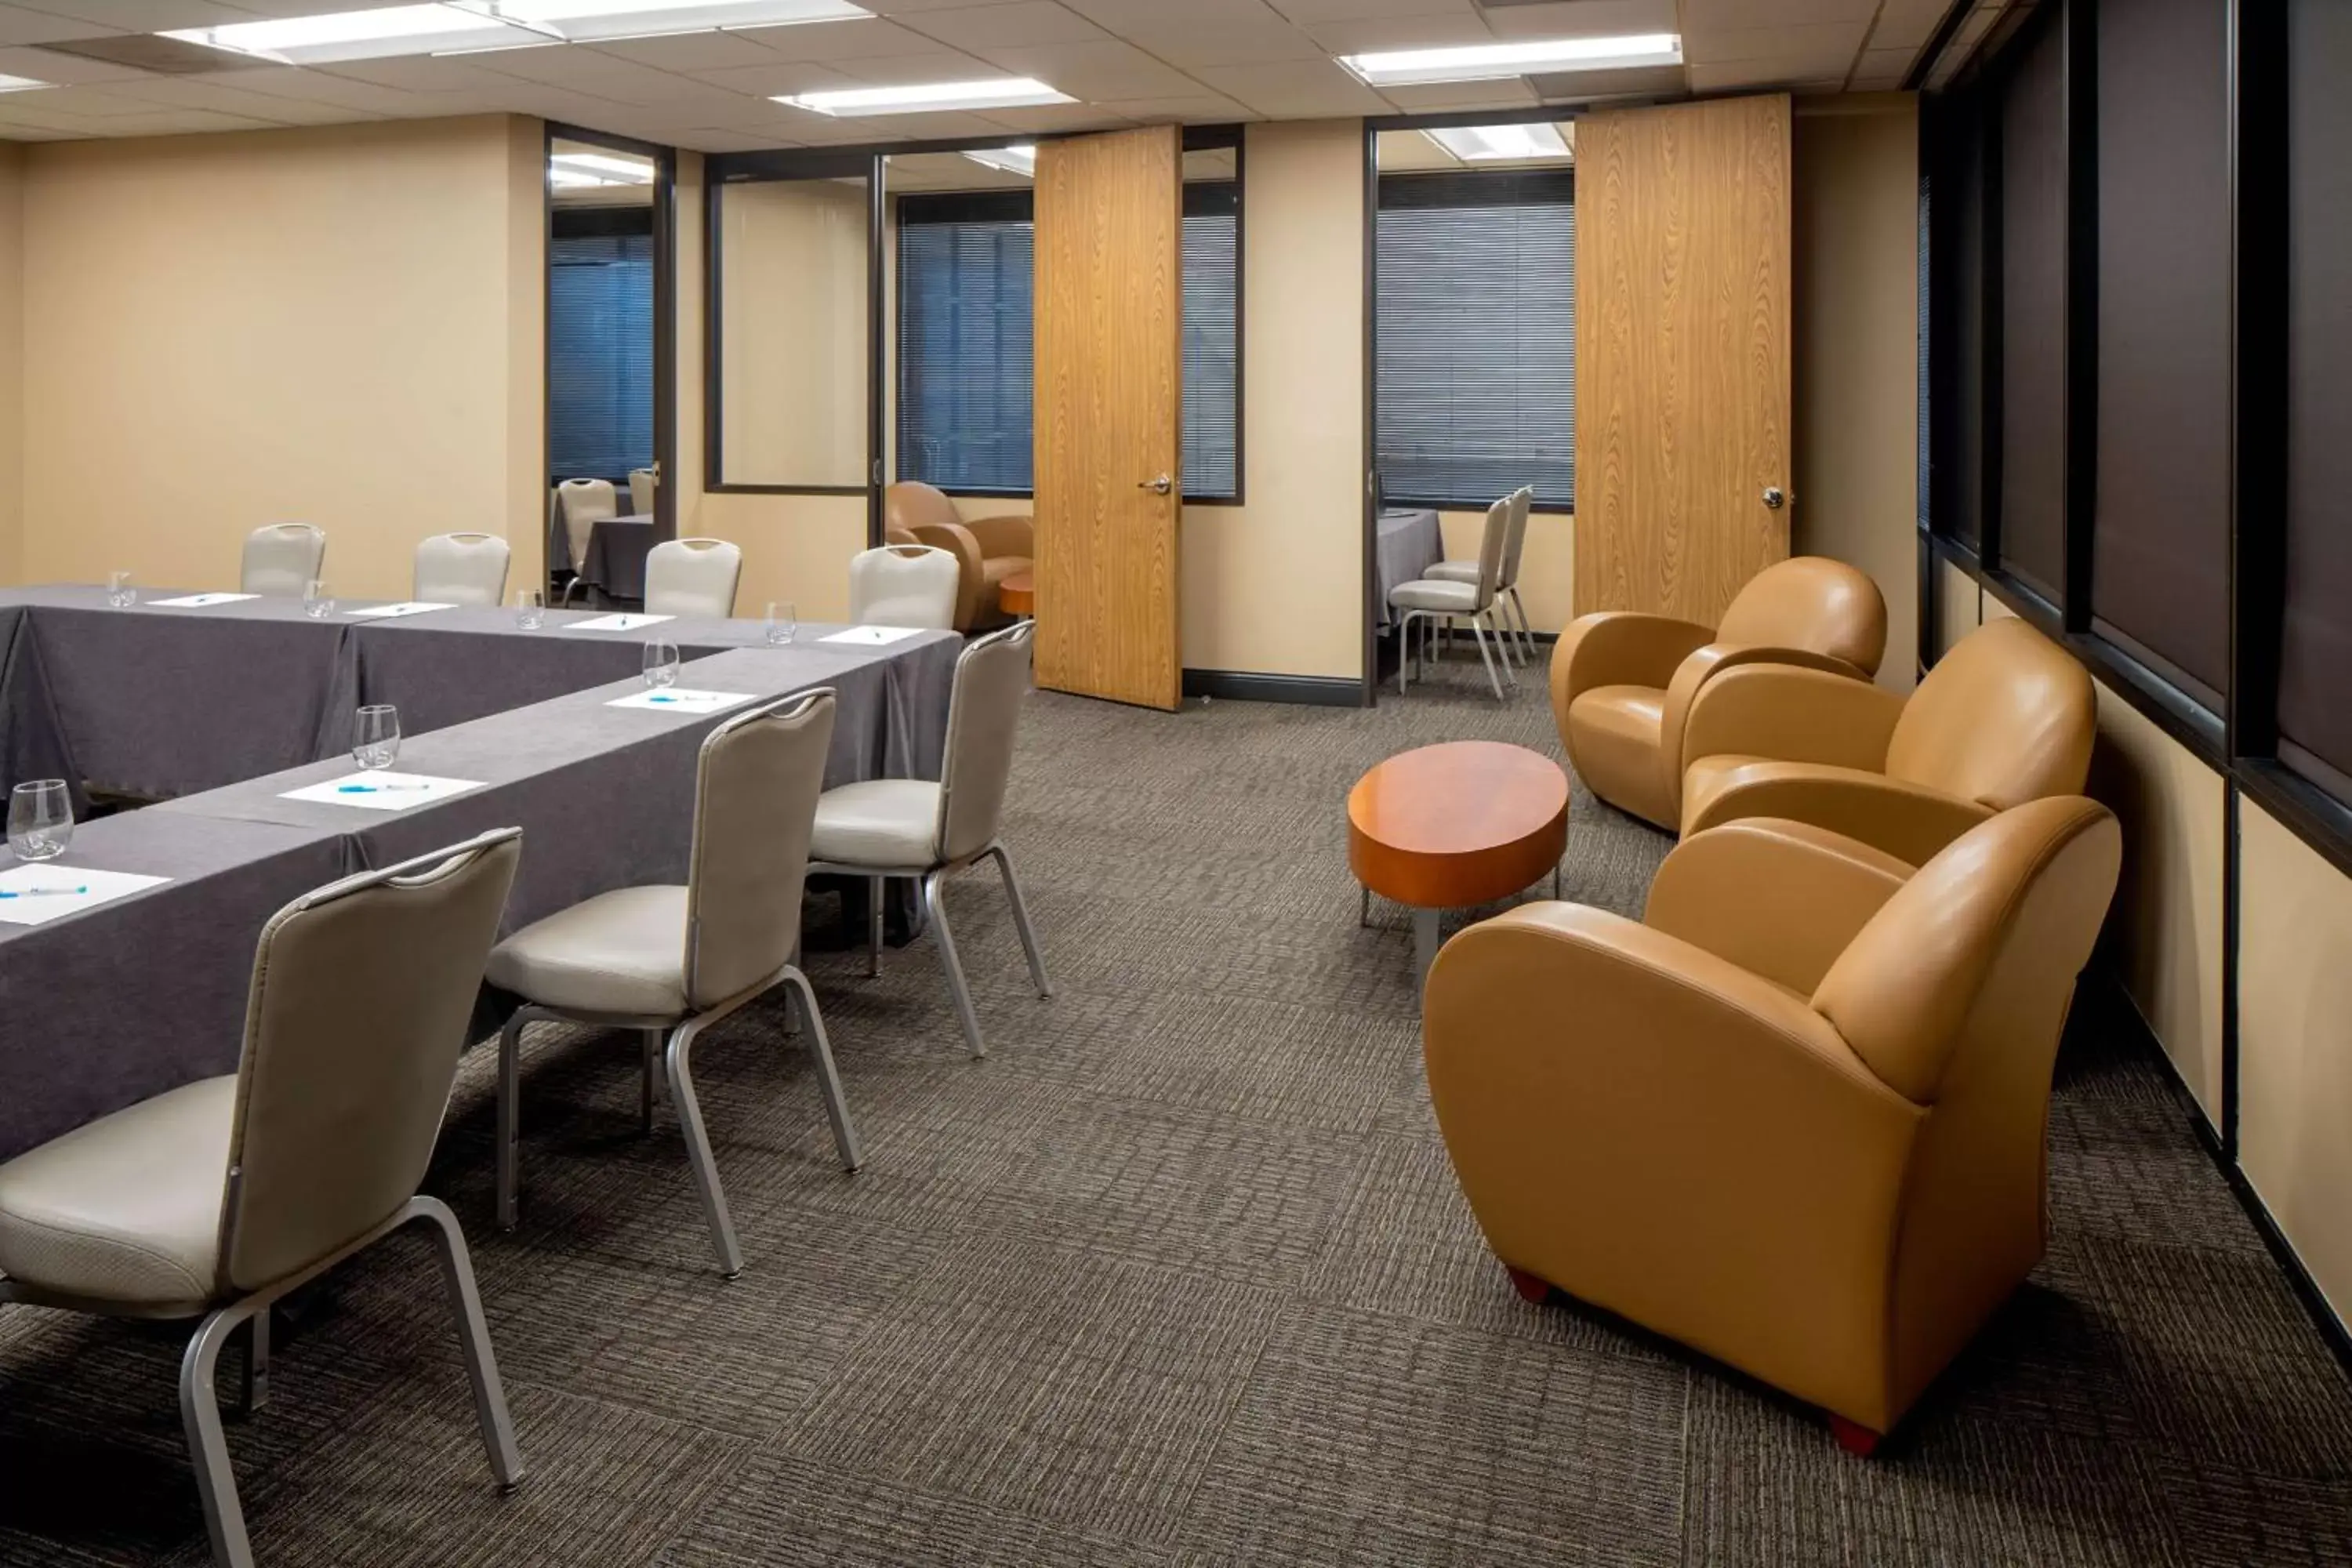 Meeting/conference room in Hyatt House New Orleans Downtown